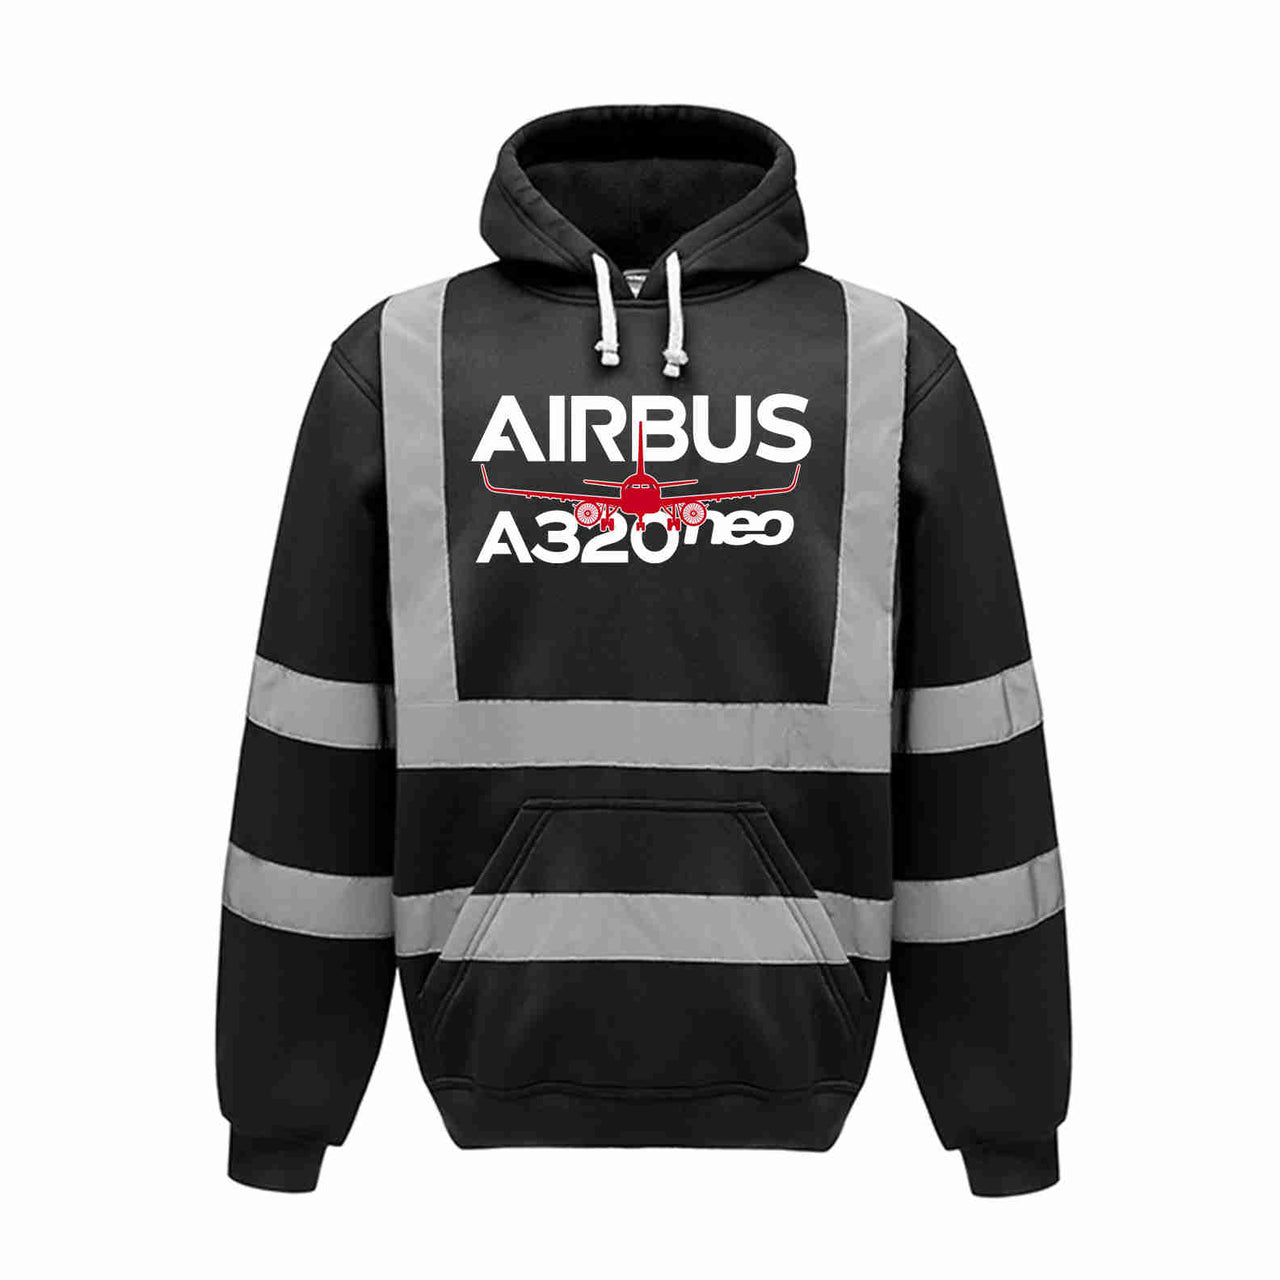 Amazing Airbus A320neo Designed Reflective Hoodies